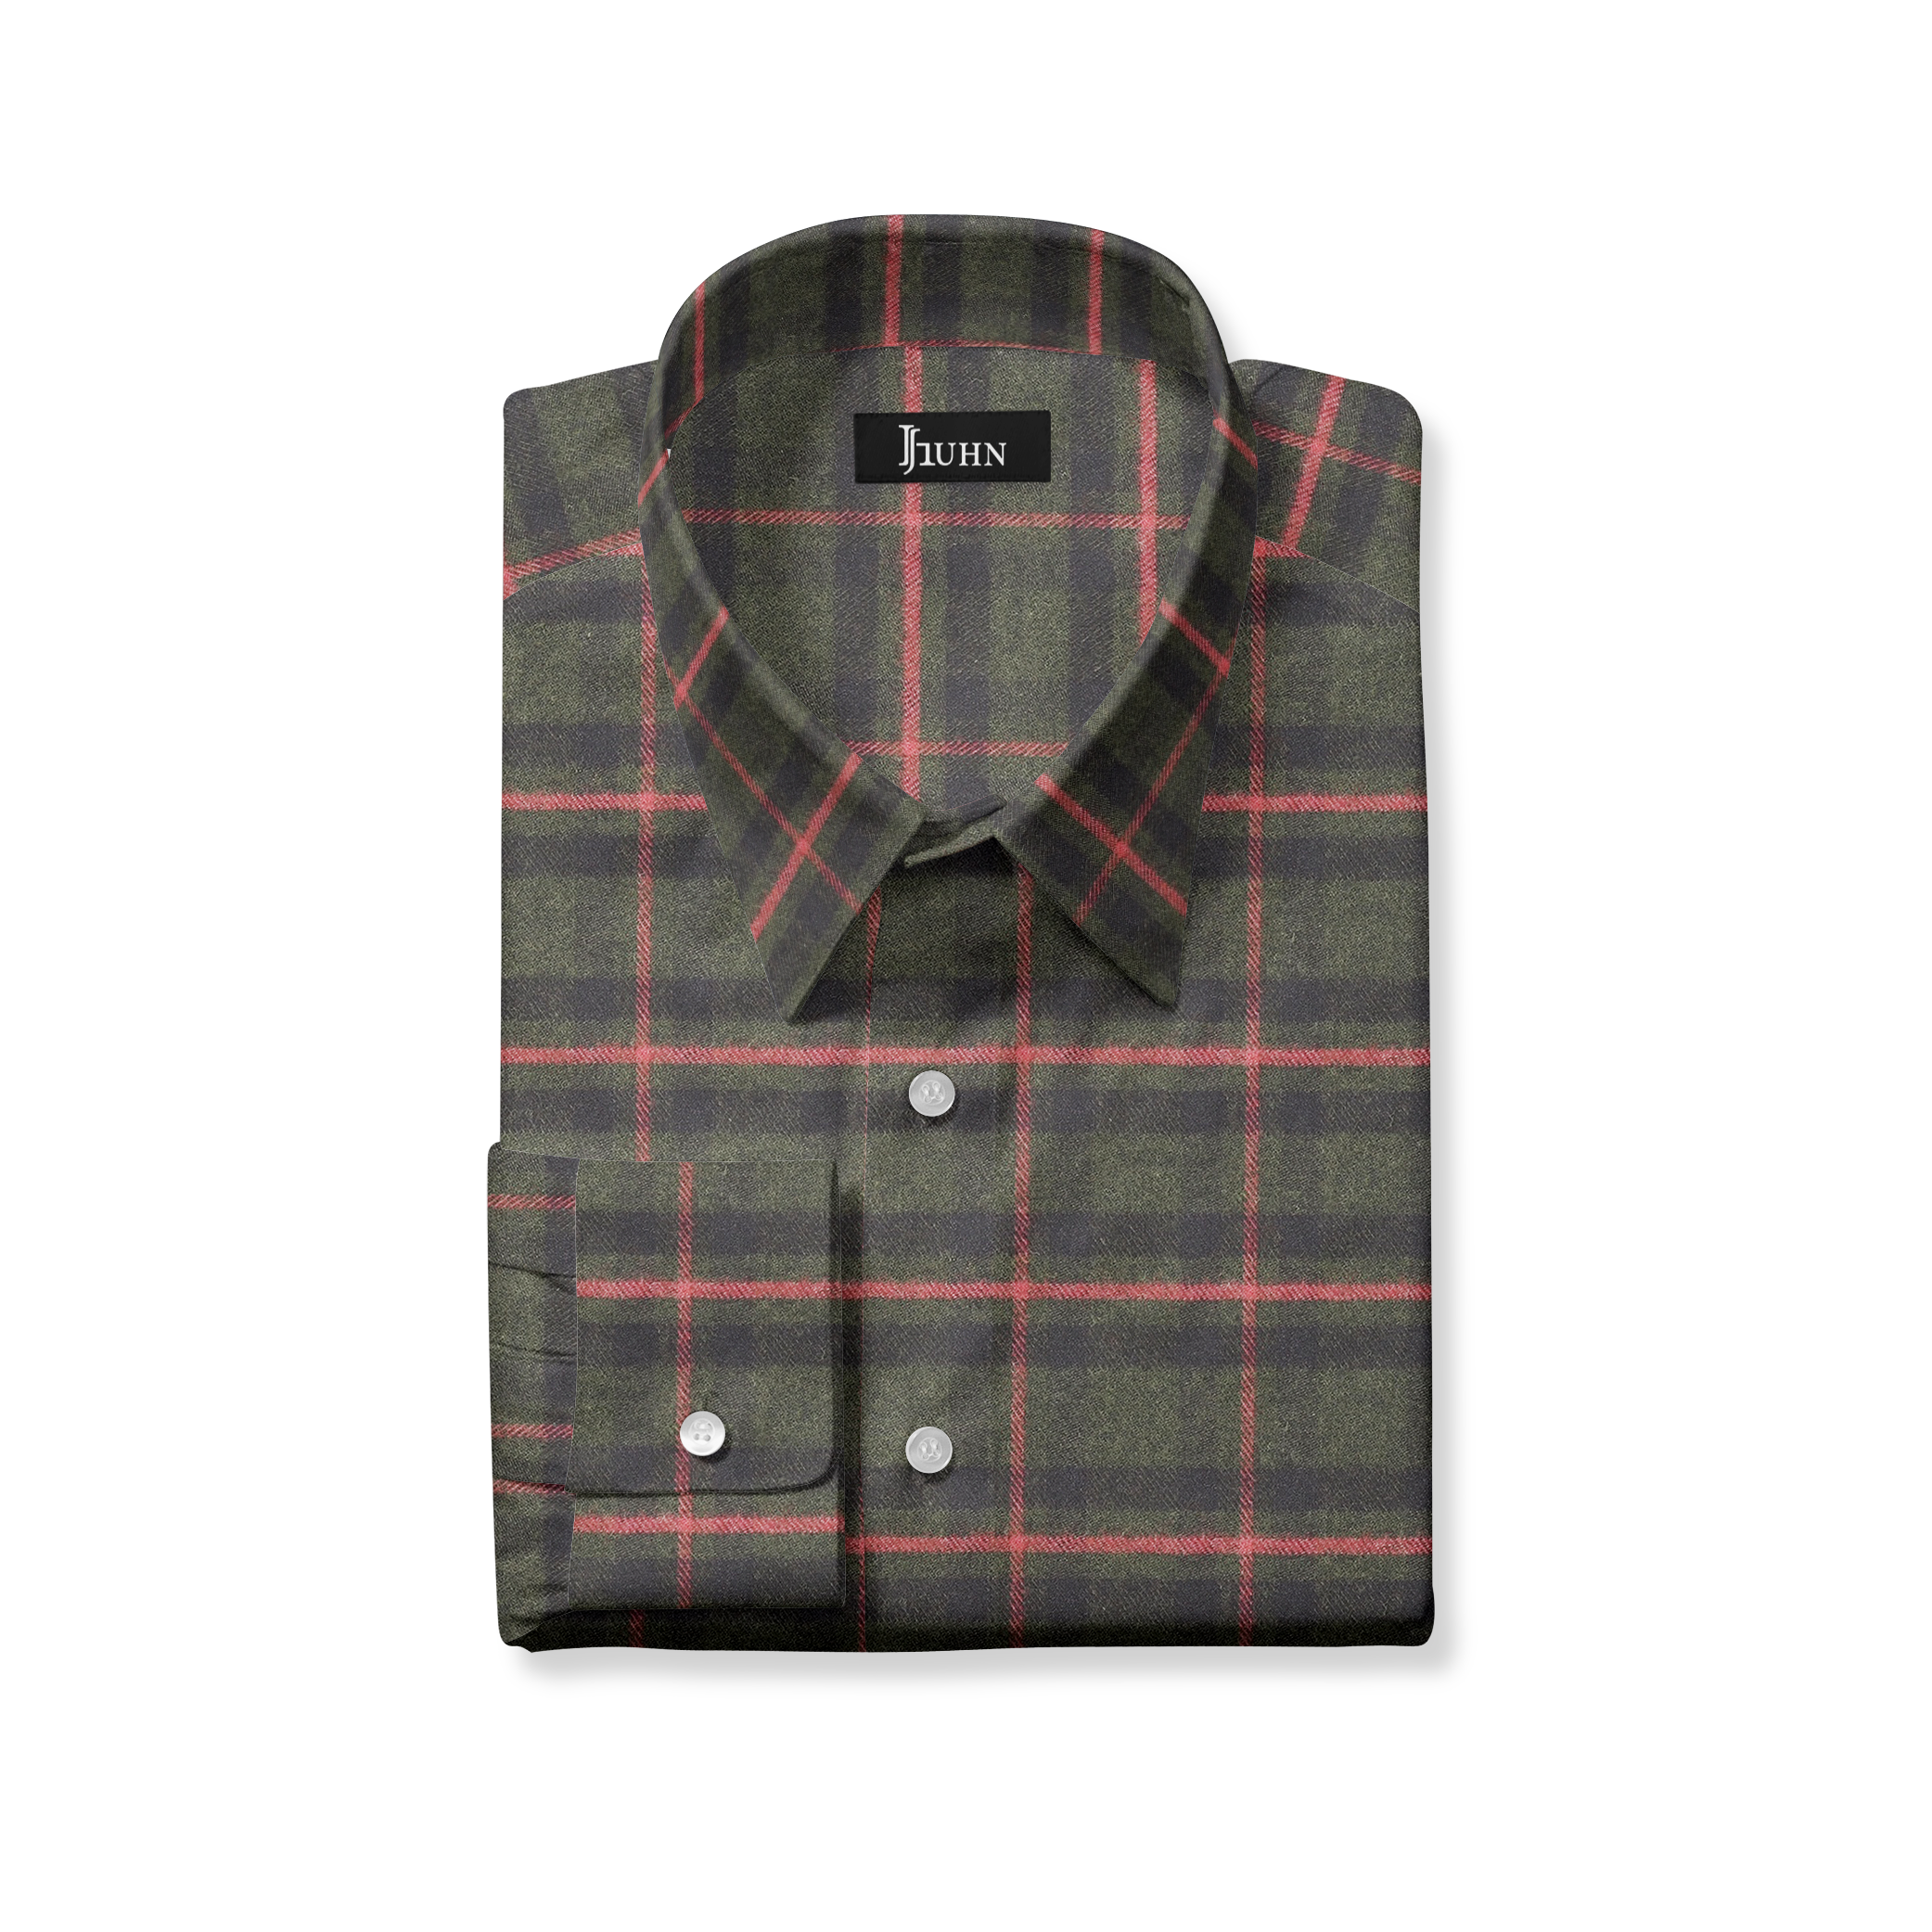 Fall 2022 Olive & Red Plaid Flannel Men's Shirt